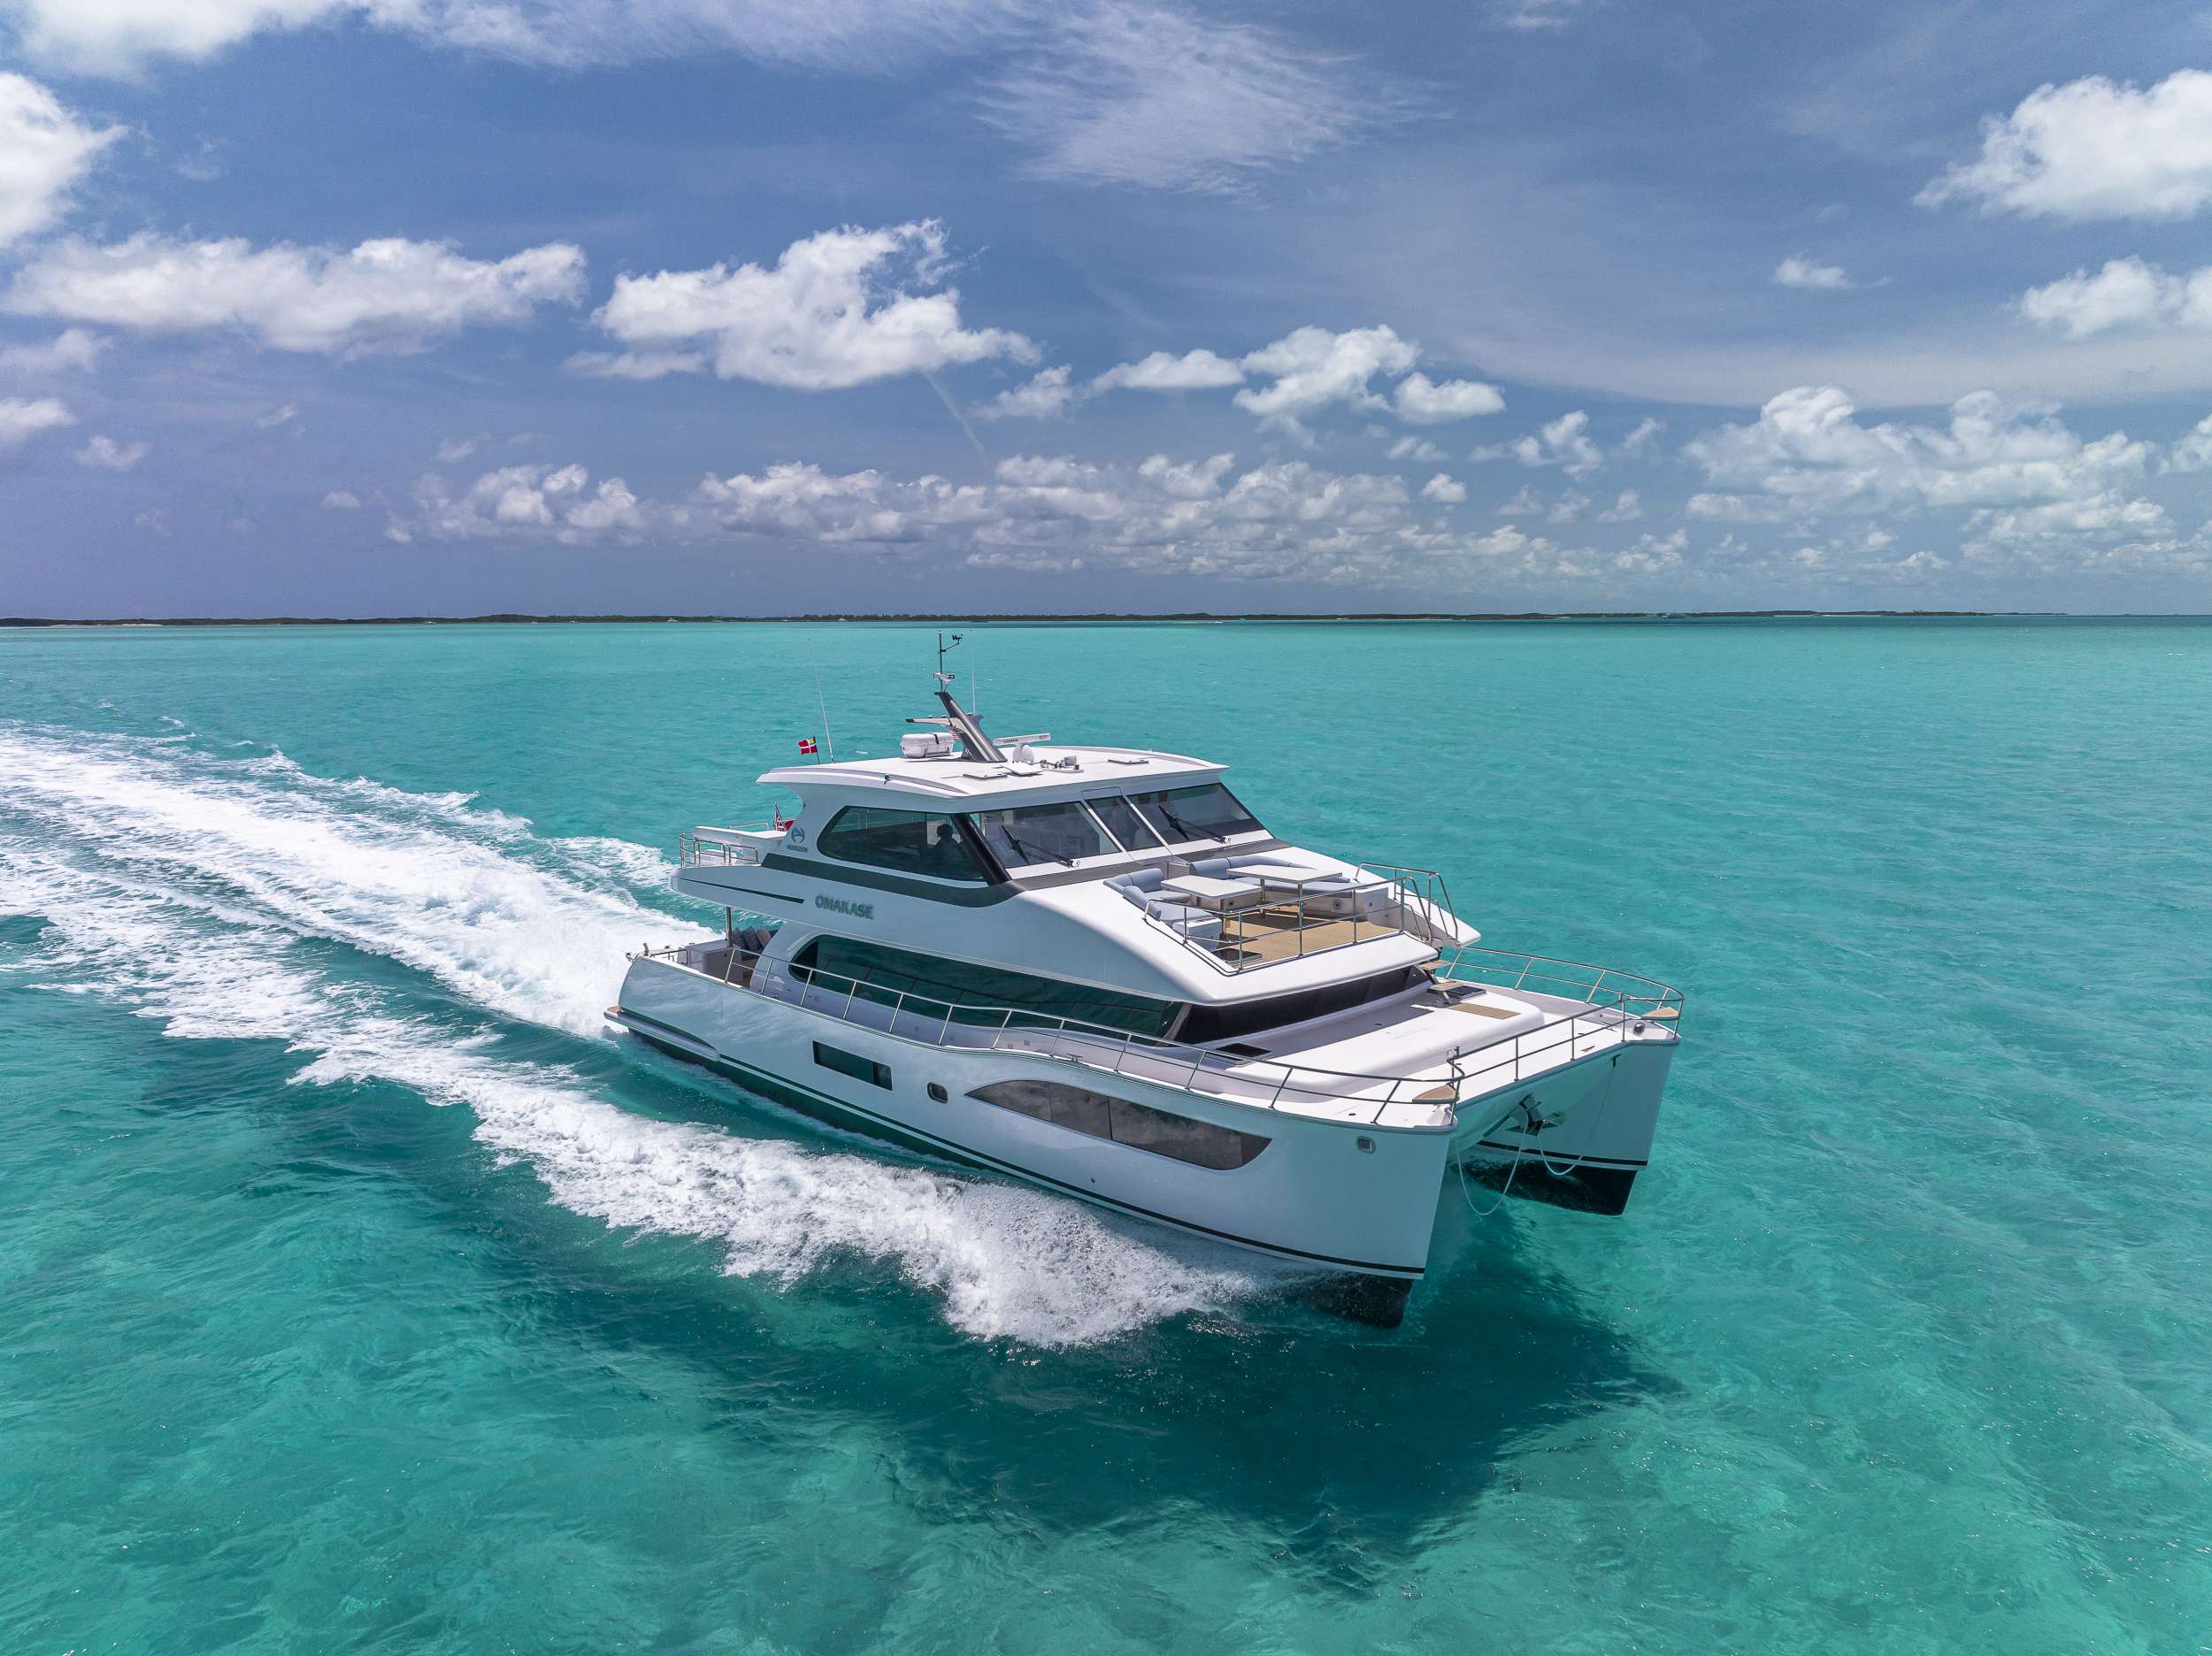 OMAKASE - Yacht Charter East End Bay & Boat hire in Bahamas & Caribbean 1